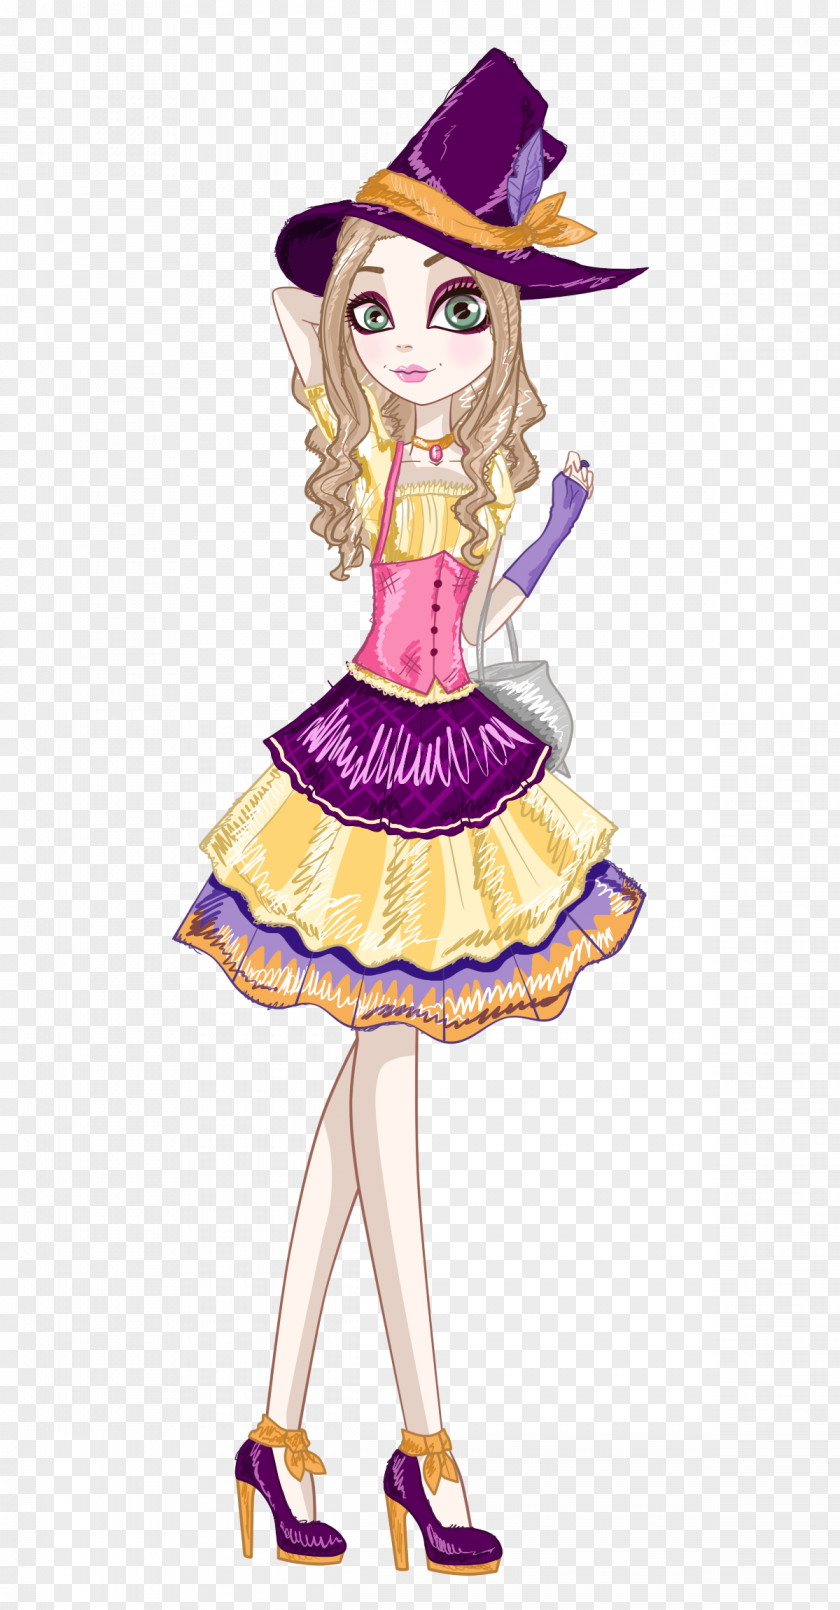 Happily Ever After High Daughter Witchcraft Hansel And Gretel White Rabbit PNG